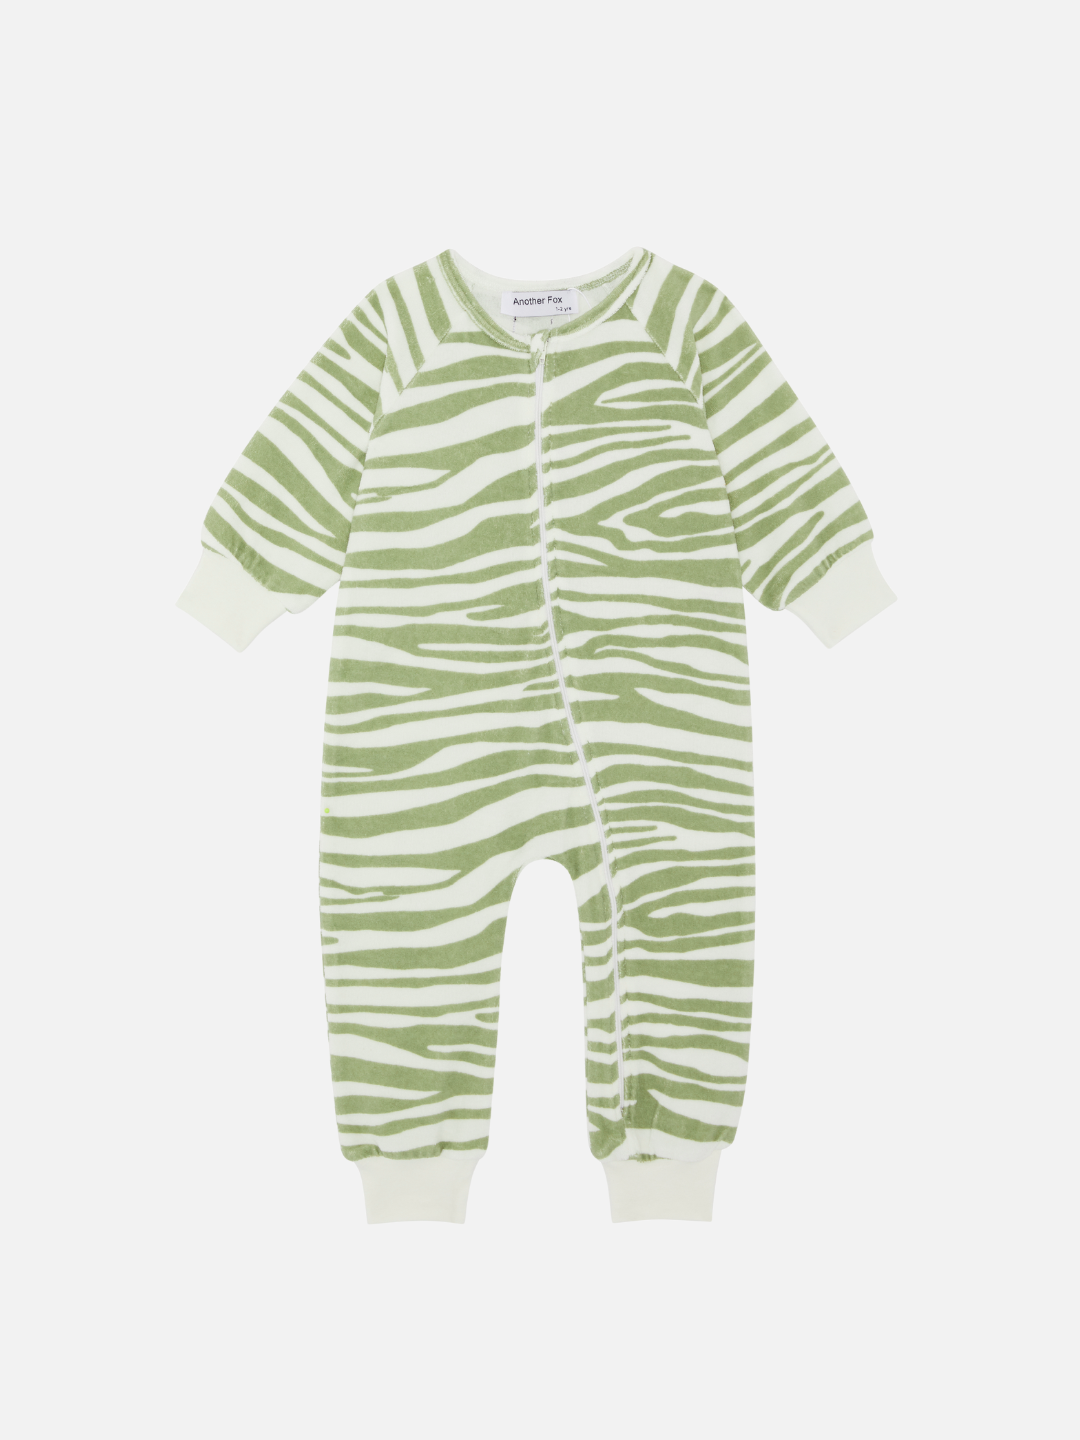 A front view of the baby terry towel sleep suit in green tiger print